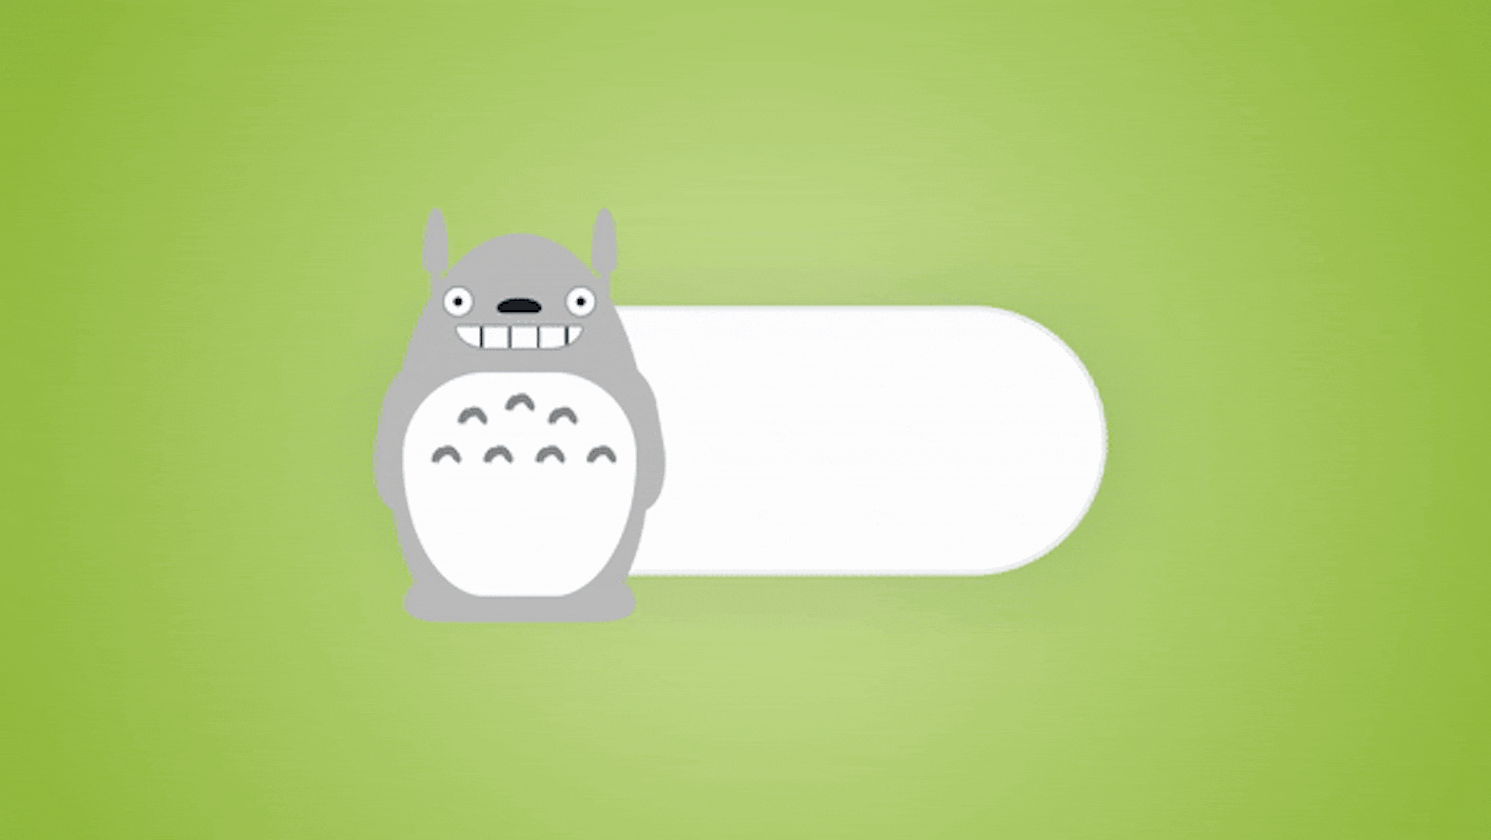 Building a Totoro Toggle Switch Using HTML and CSS